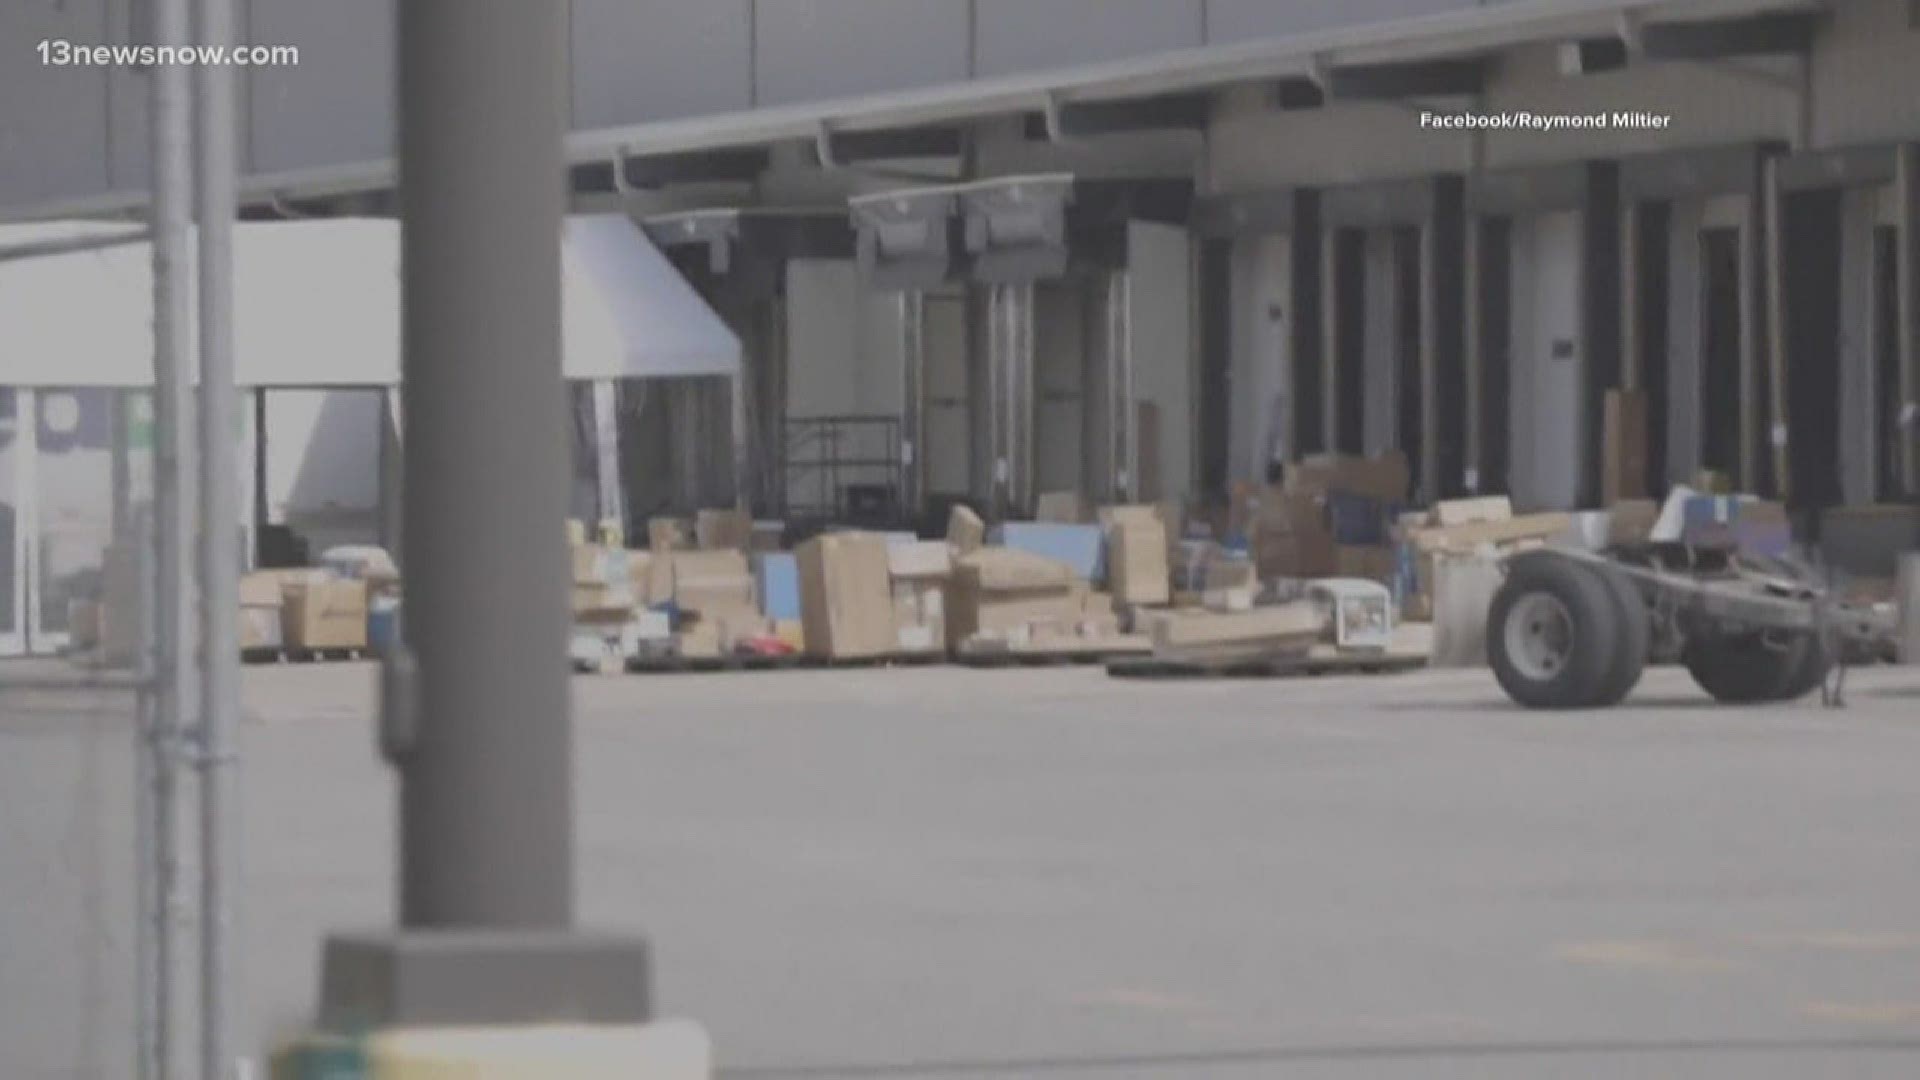 Video on Facebook showed packages piled up at the FedEx Ground location in Hampton. People have been waiting for deliveries for weeks. We looked into it.